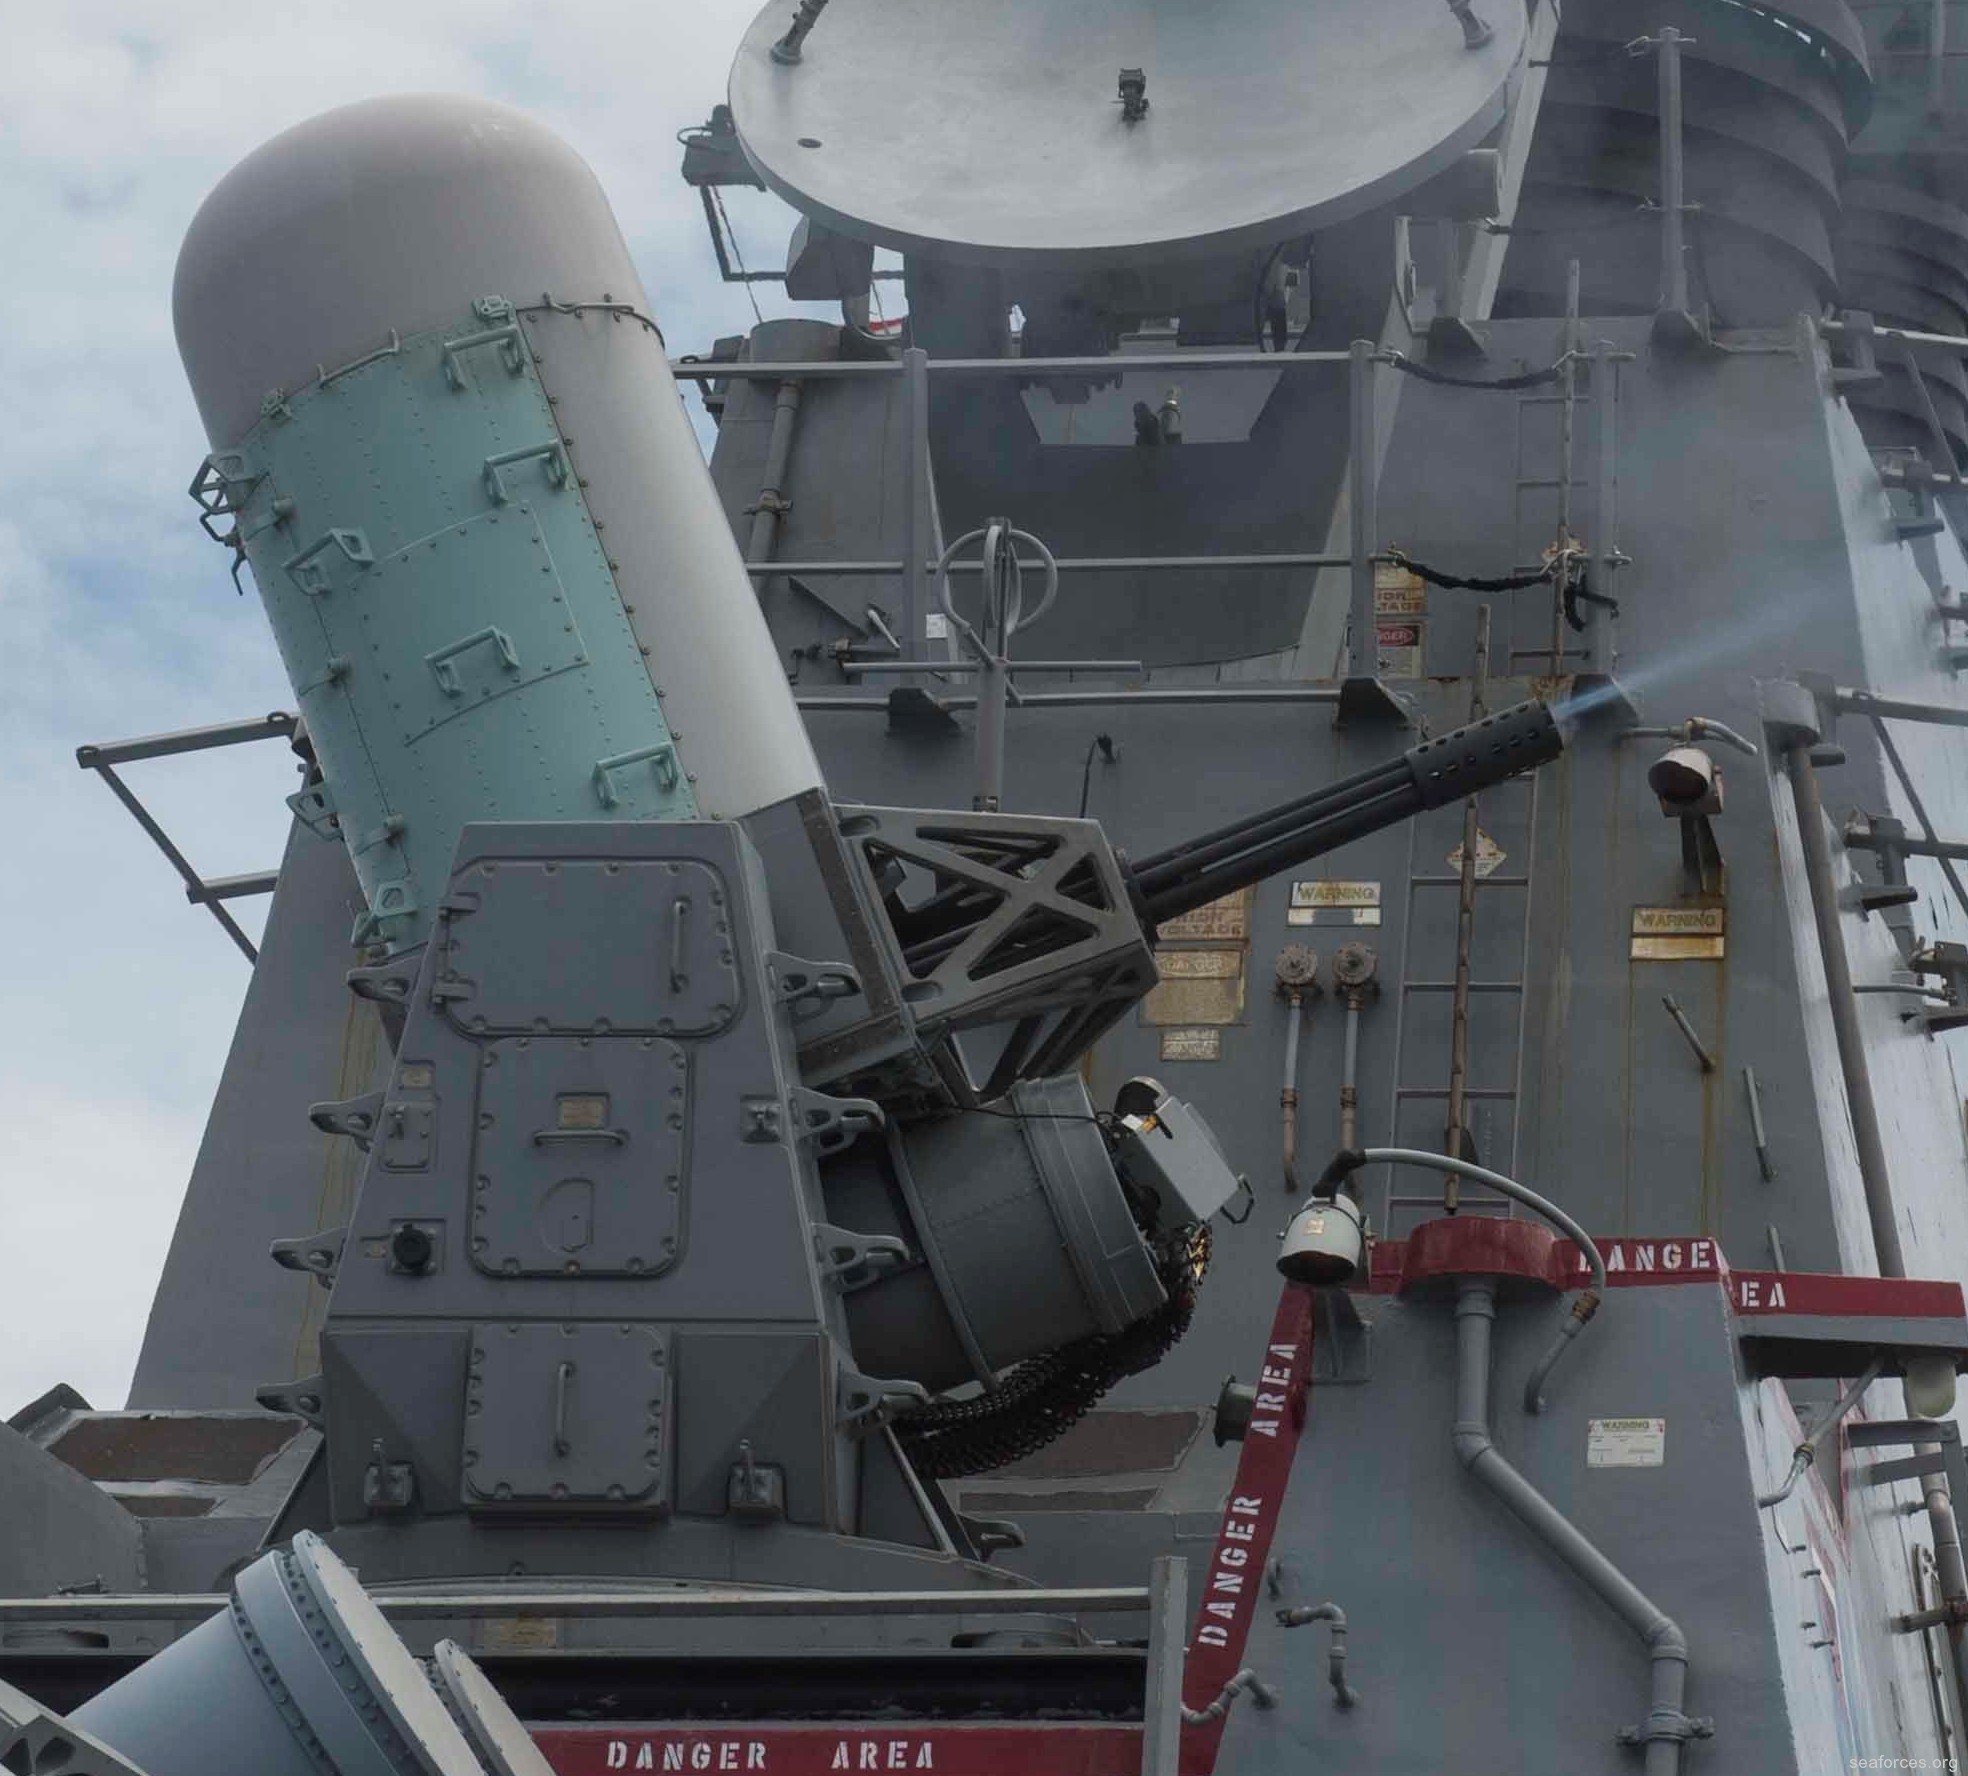 ddg-55 uss stout guided missile destroyer us navy 14 mk-15 ciws